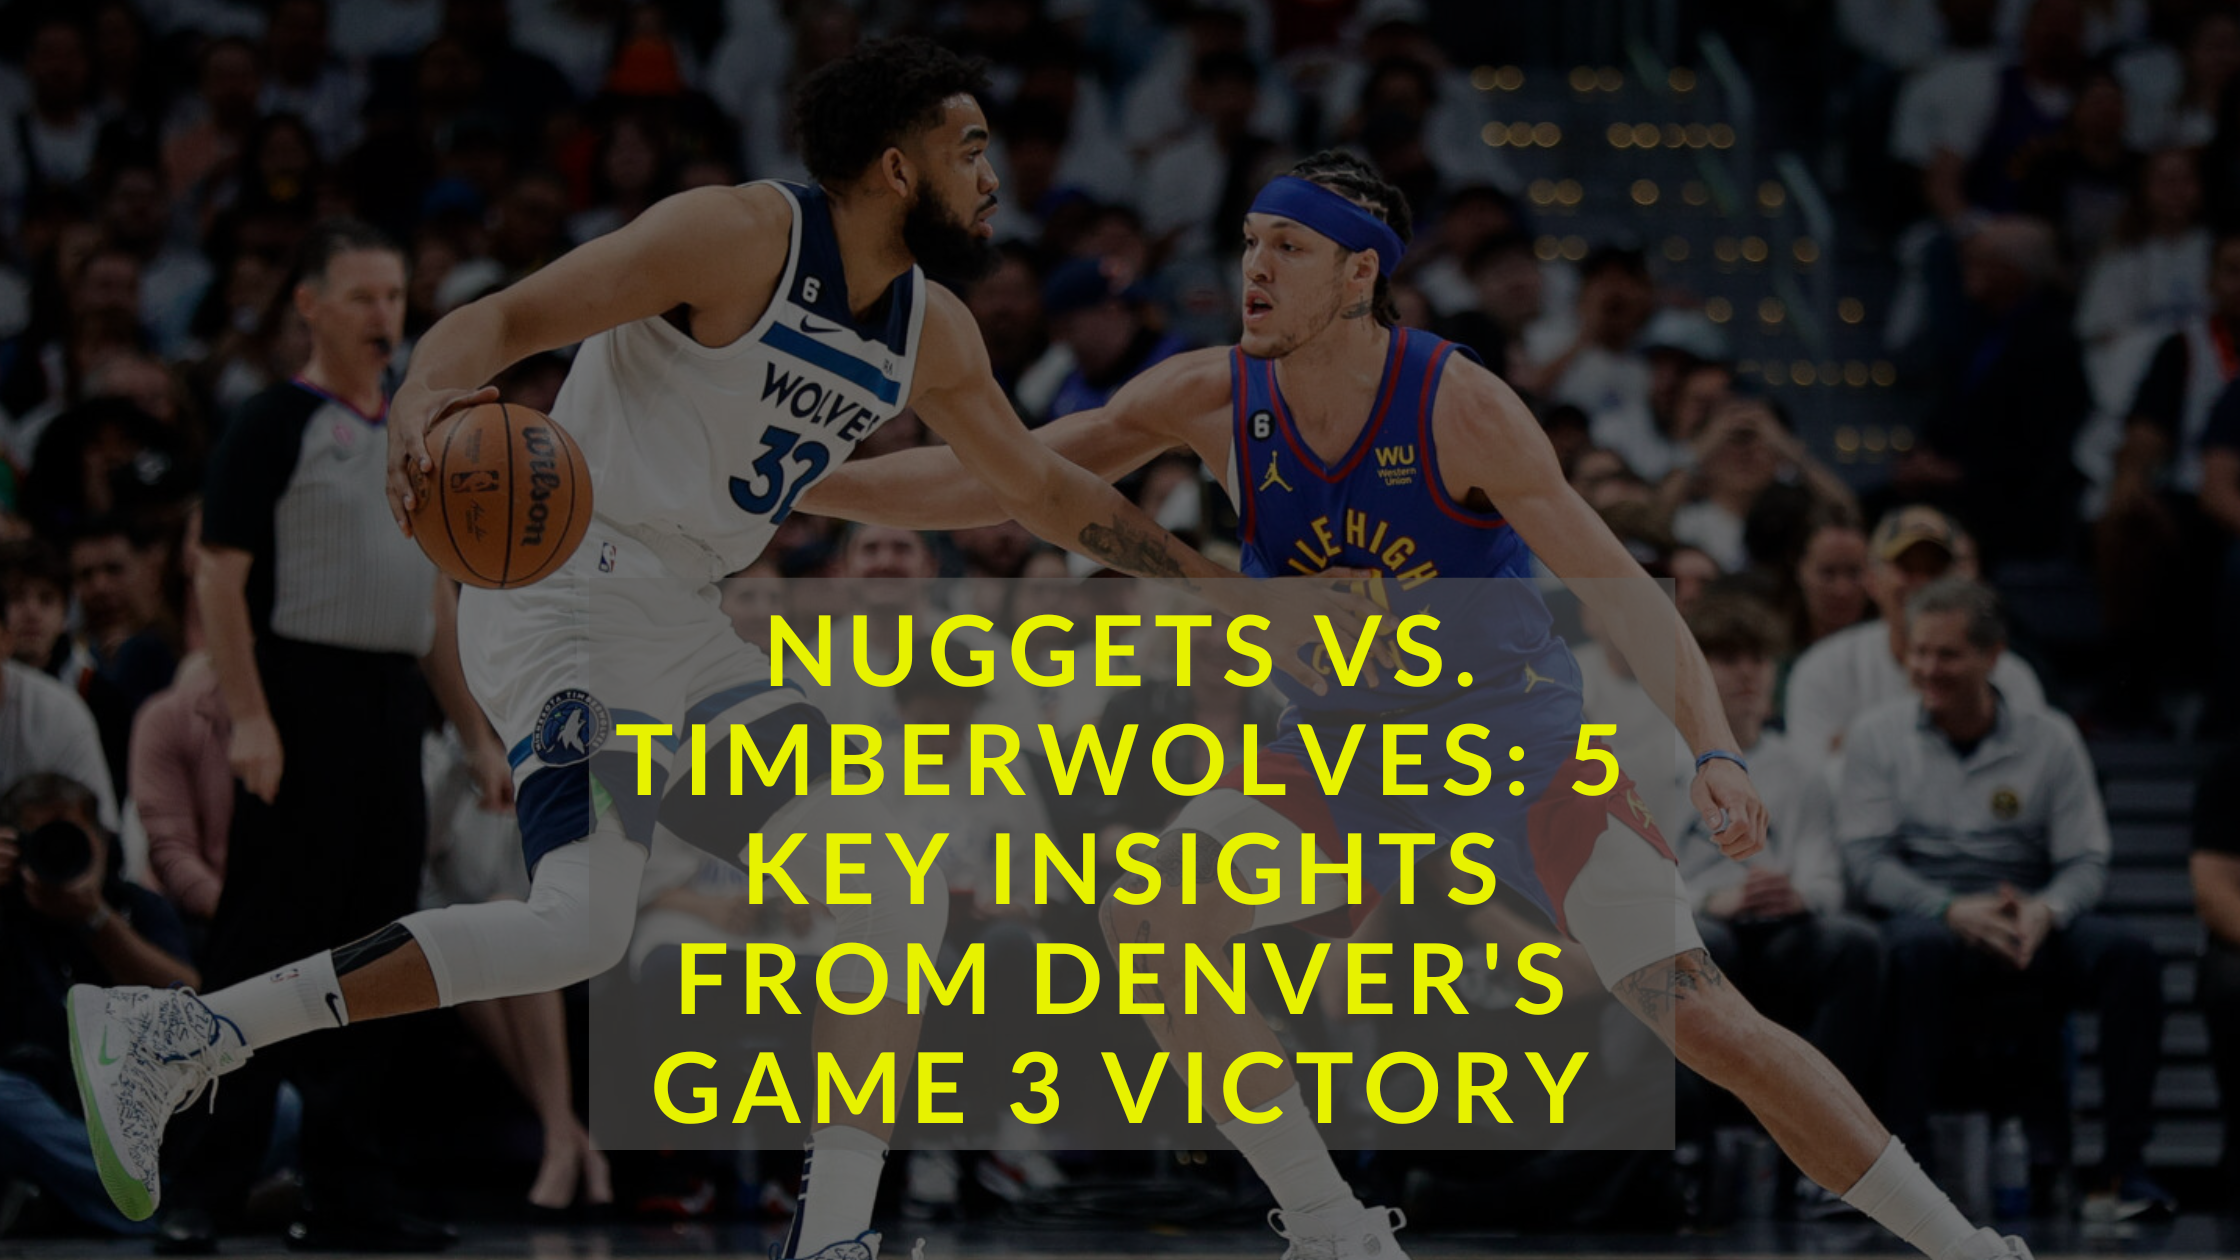 You are currently viewing Nuggets vs Timberwolves 5 Key Insights from Denver’s Game 3 Victory